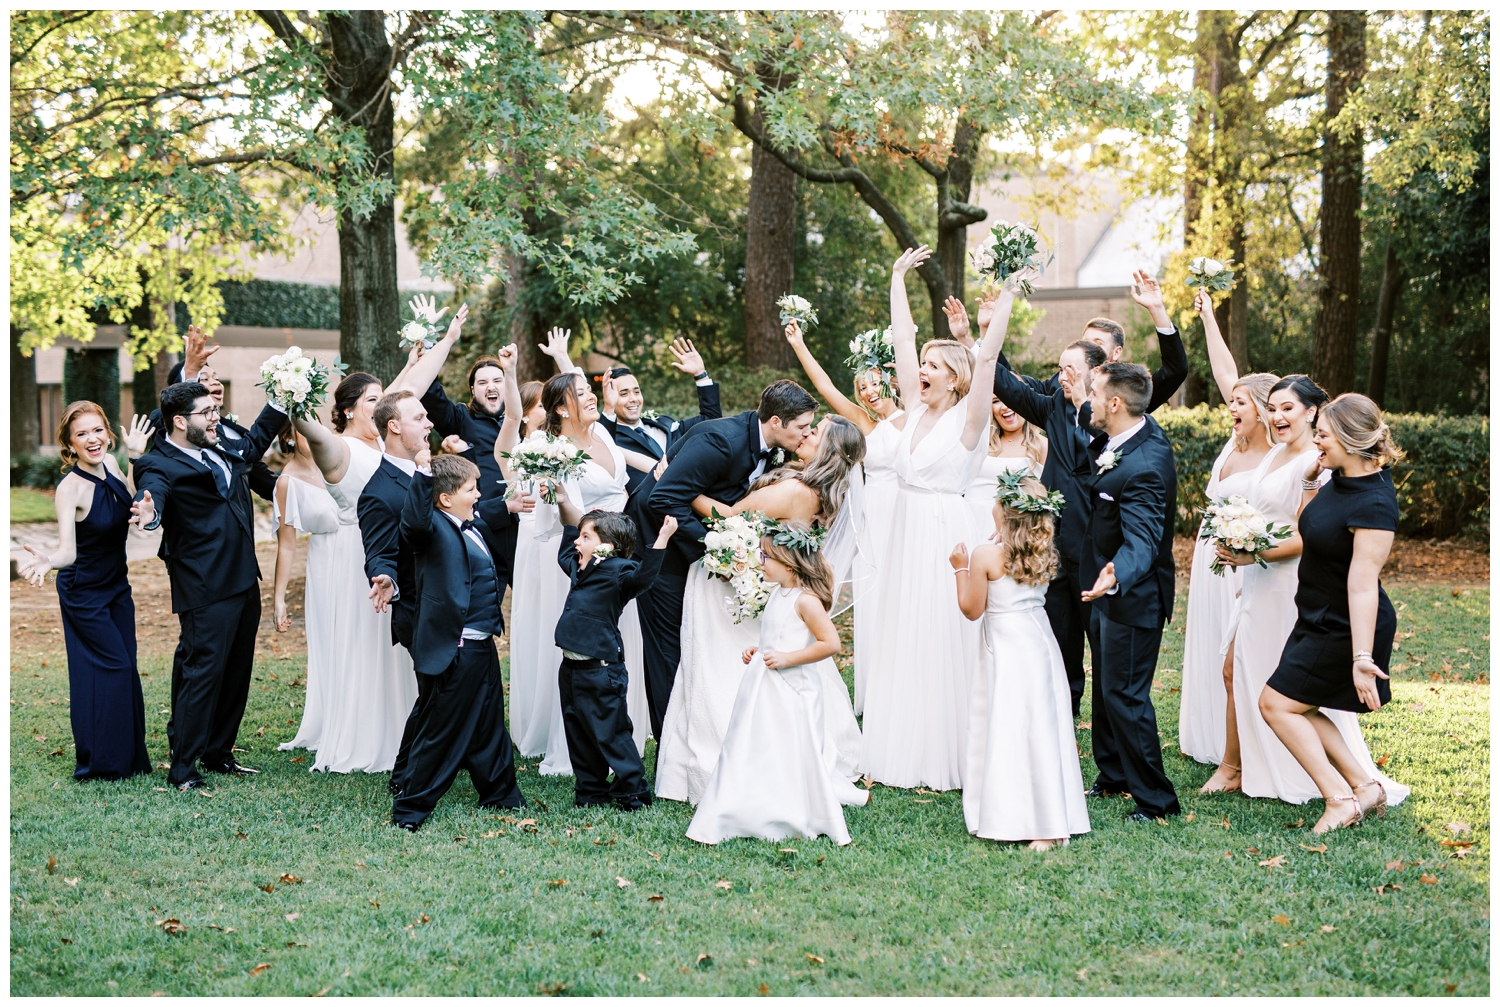 the Houstonian Hotel wedding bridal party with black tuxes and white bridesmaids dress